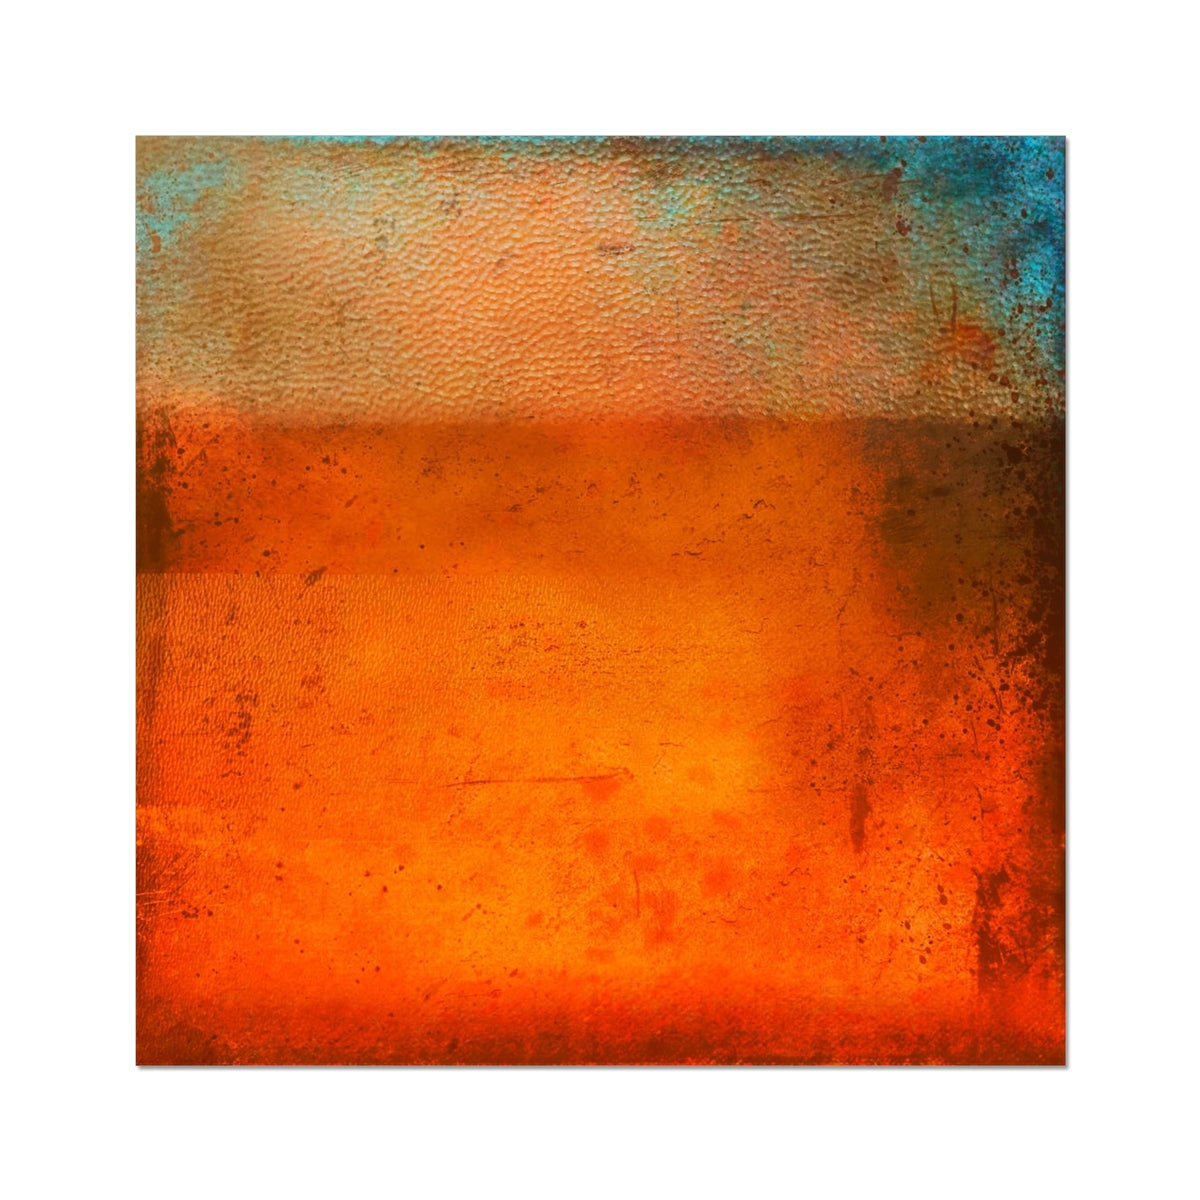 Sunset Horizon Abstract Painting | Artist Proof Collector Prints From Scotland-Artist Proof Collector Prints-Abstract & Impressionistic Art Gallery-20"x20"-Paintings, Prints, Homeware, Art Gifts From Scotland By Scottish Artist Kevin Hunter